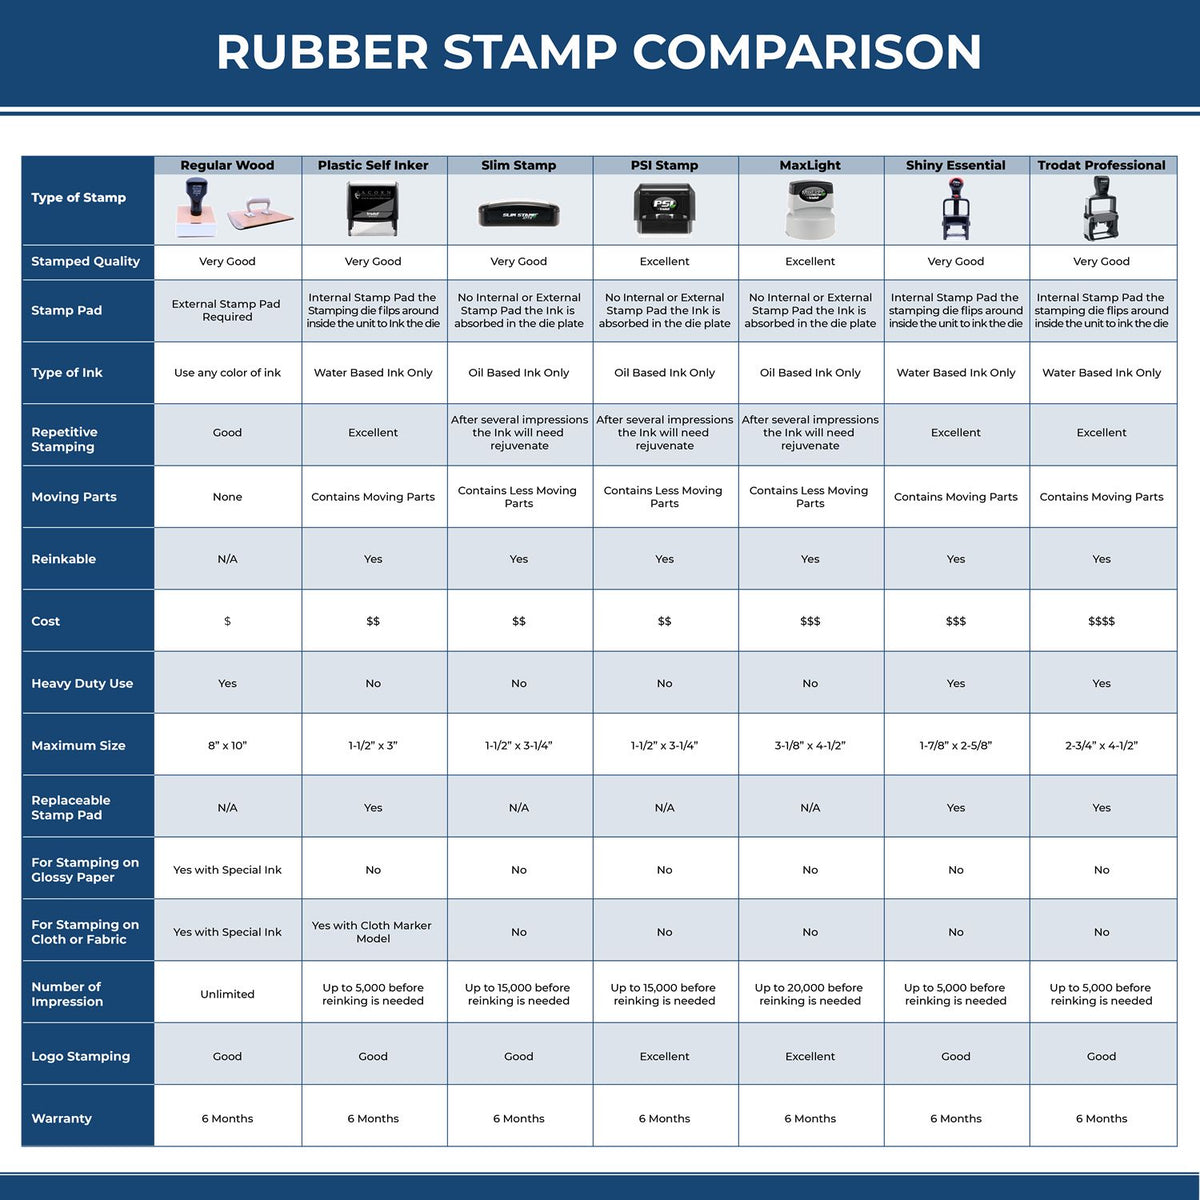 A comparison chart for the different types of mount models available for the Premium MaxLight Pre-Inked Missouri Landscape Architectural Stamp.